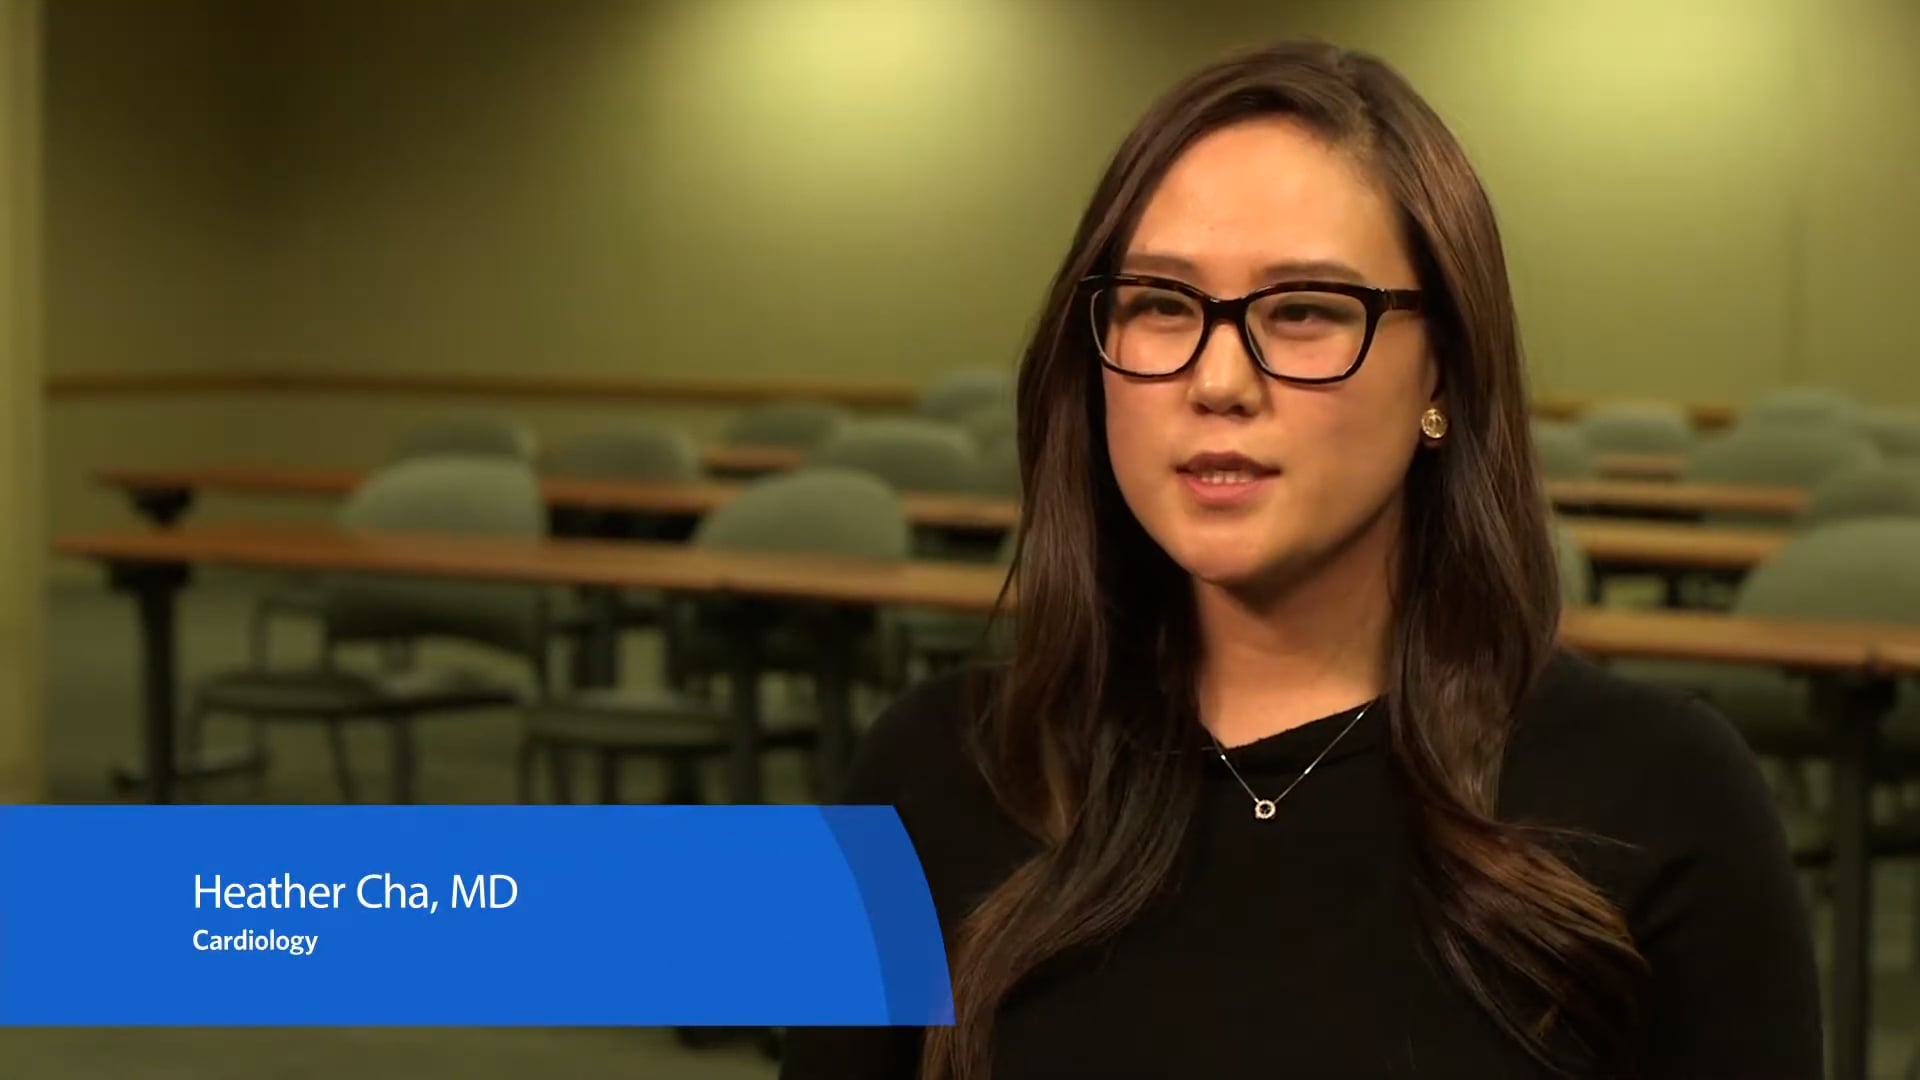 Ascension Healthcare - "Meet Heather Cha"